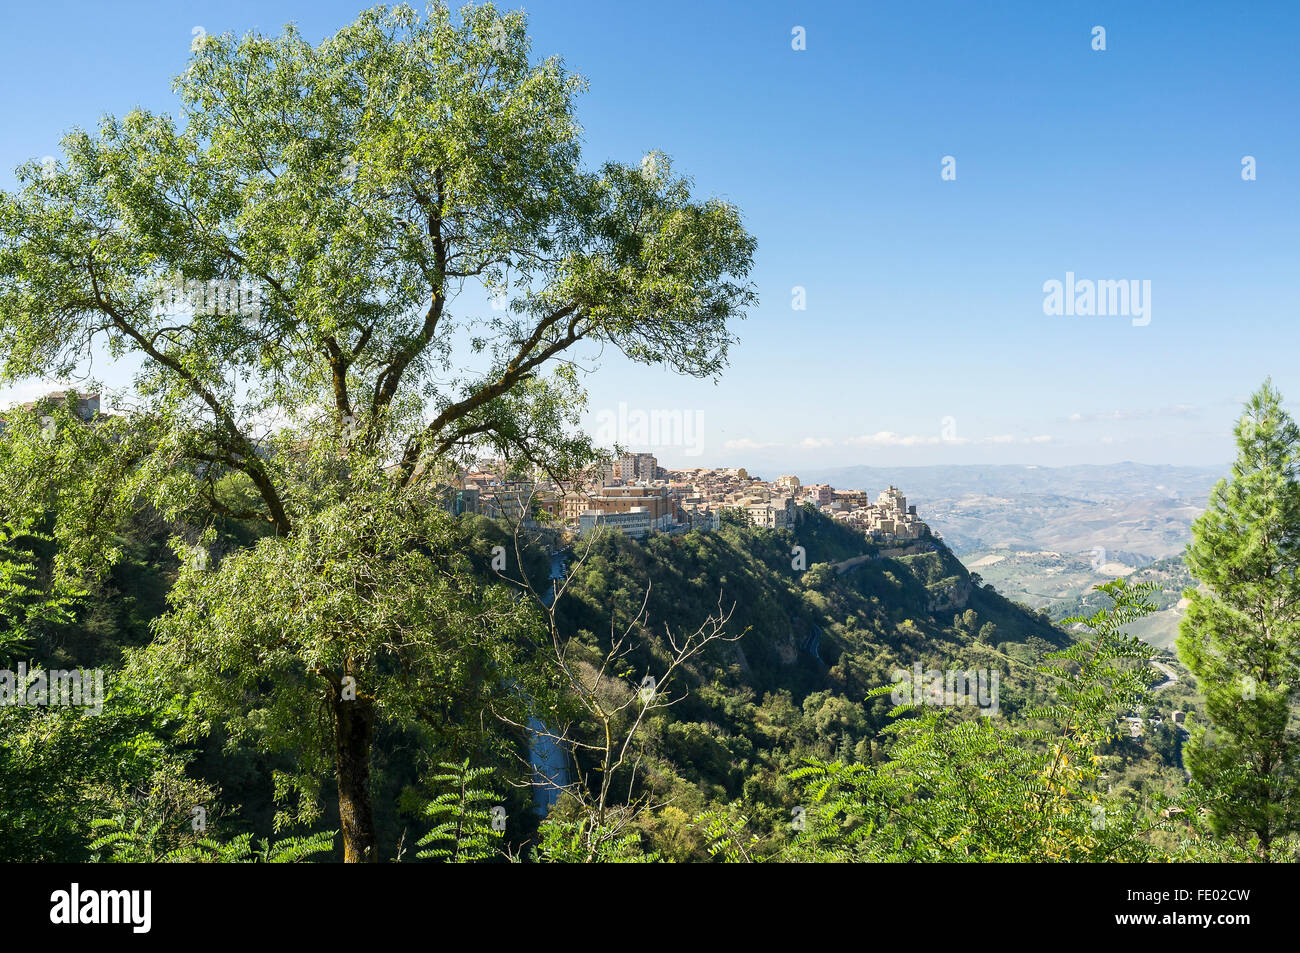 Hilltop town and landscape in Sicily, Italy Stock Photo